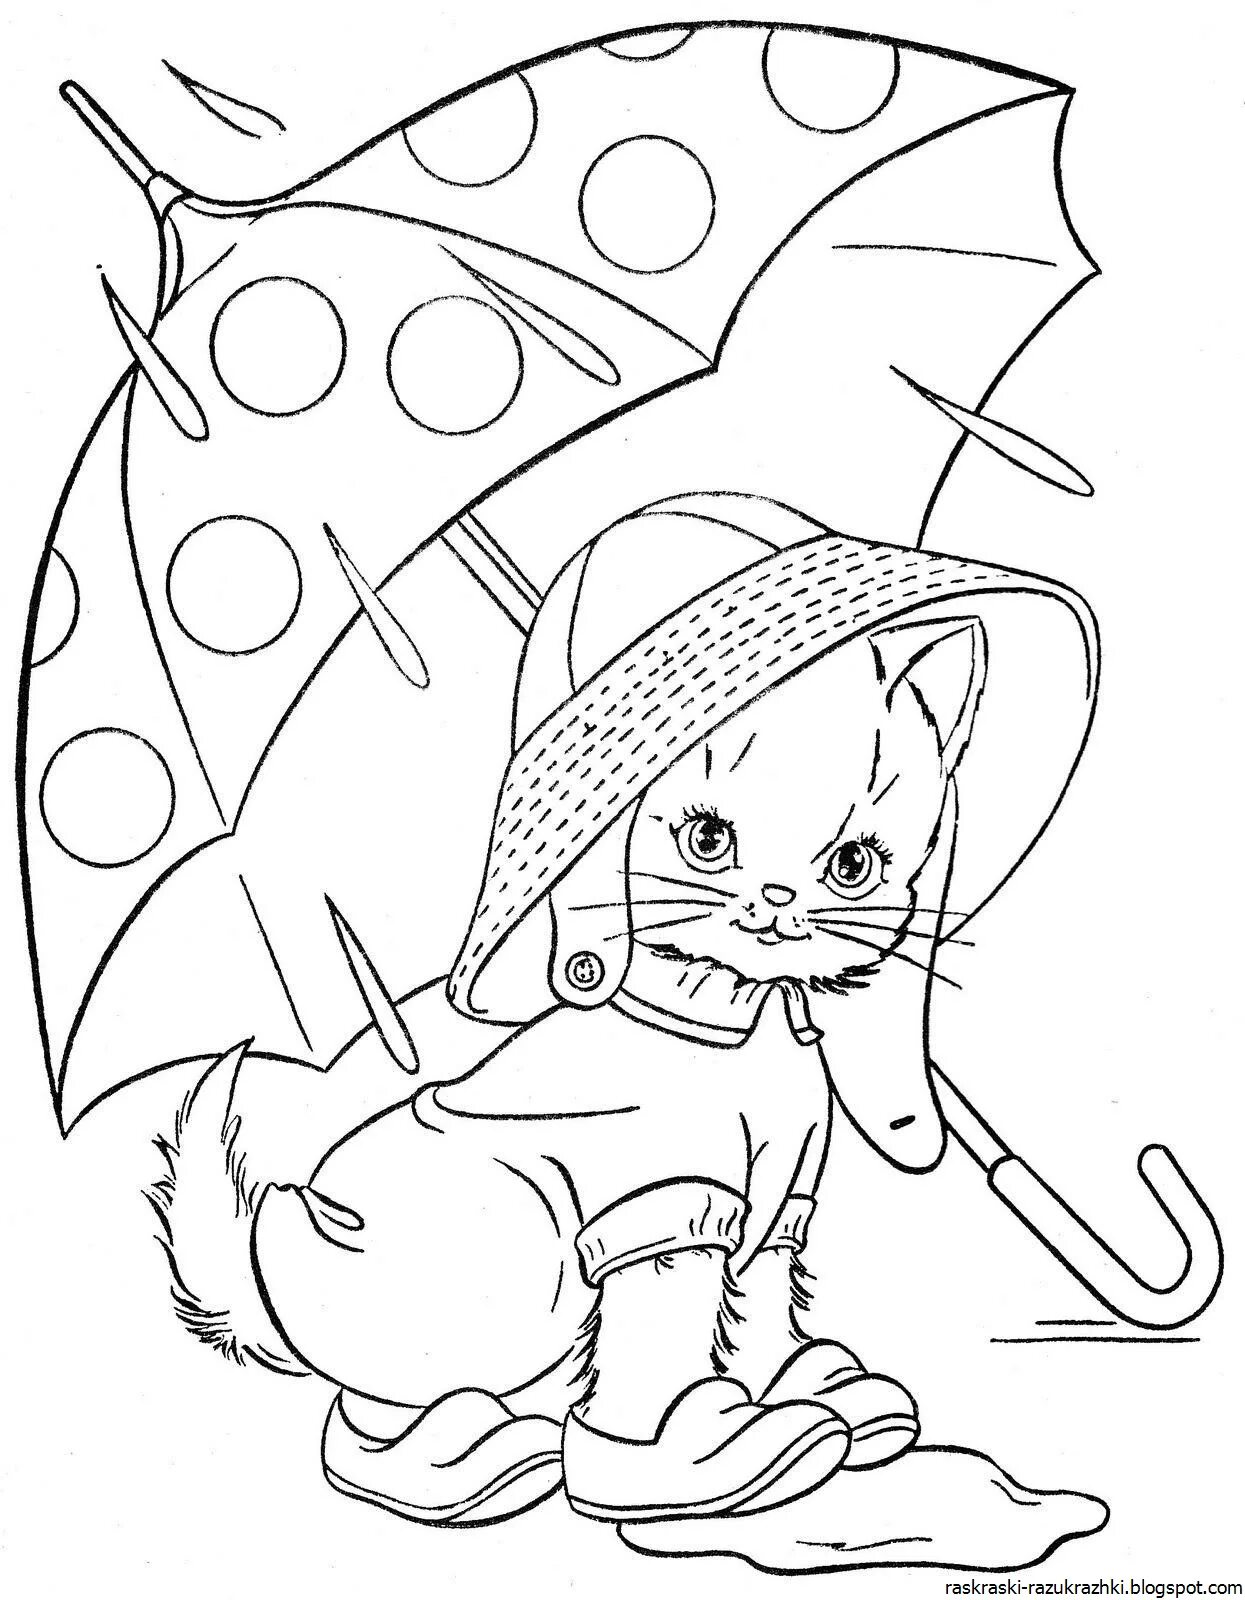 Coloring book glowing cat in a hat